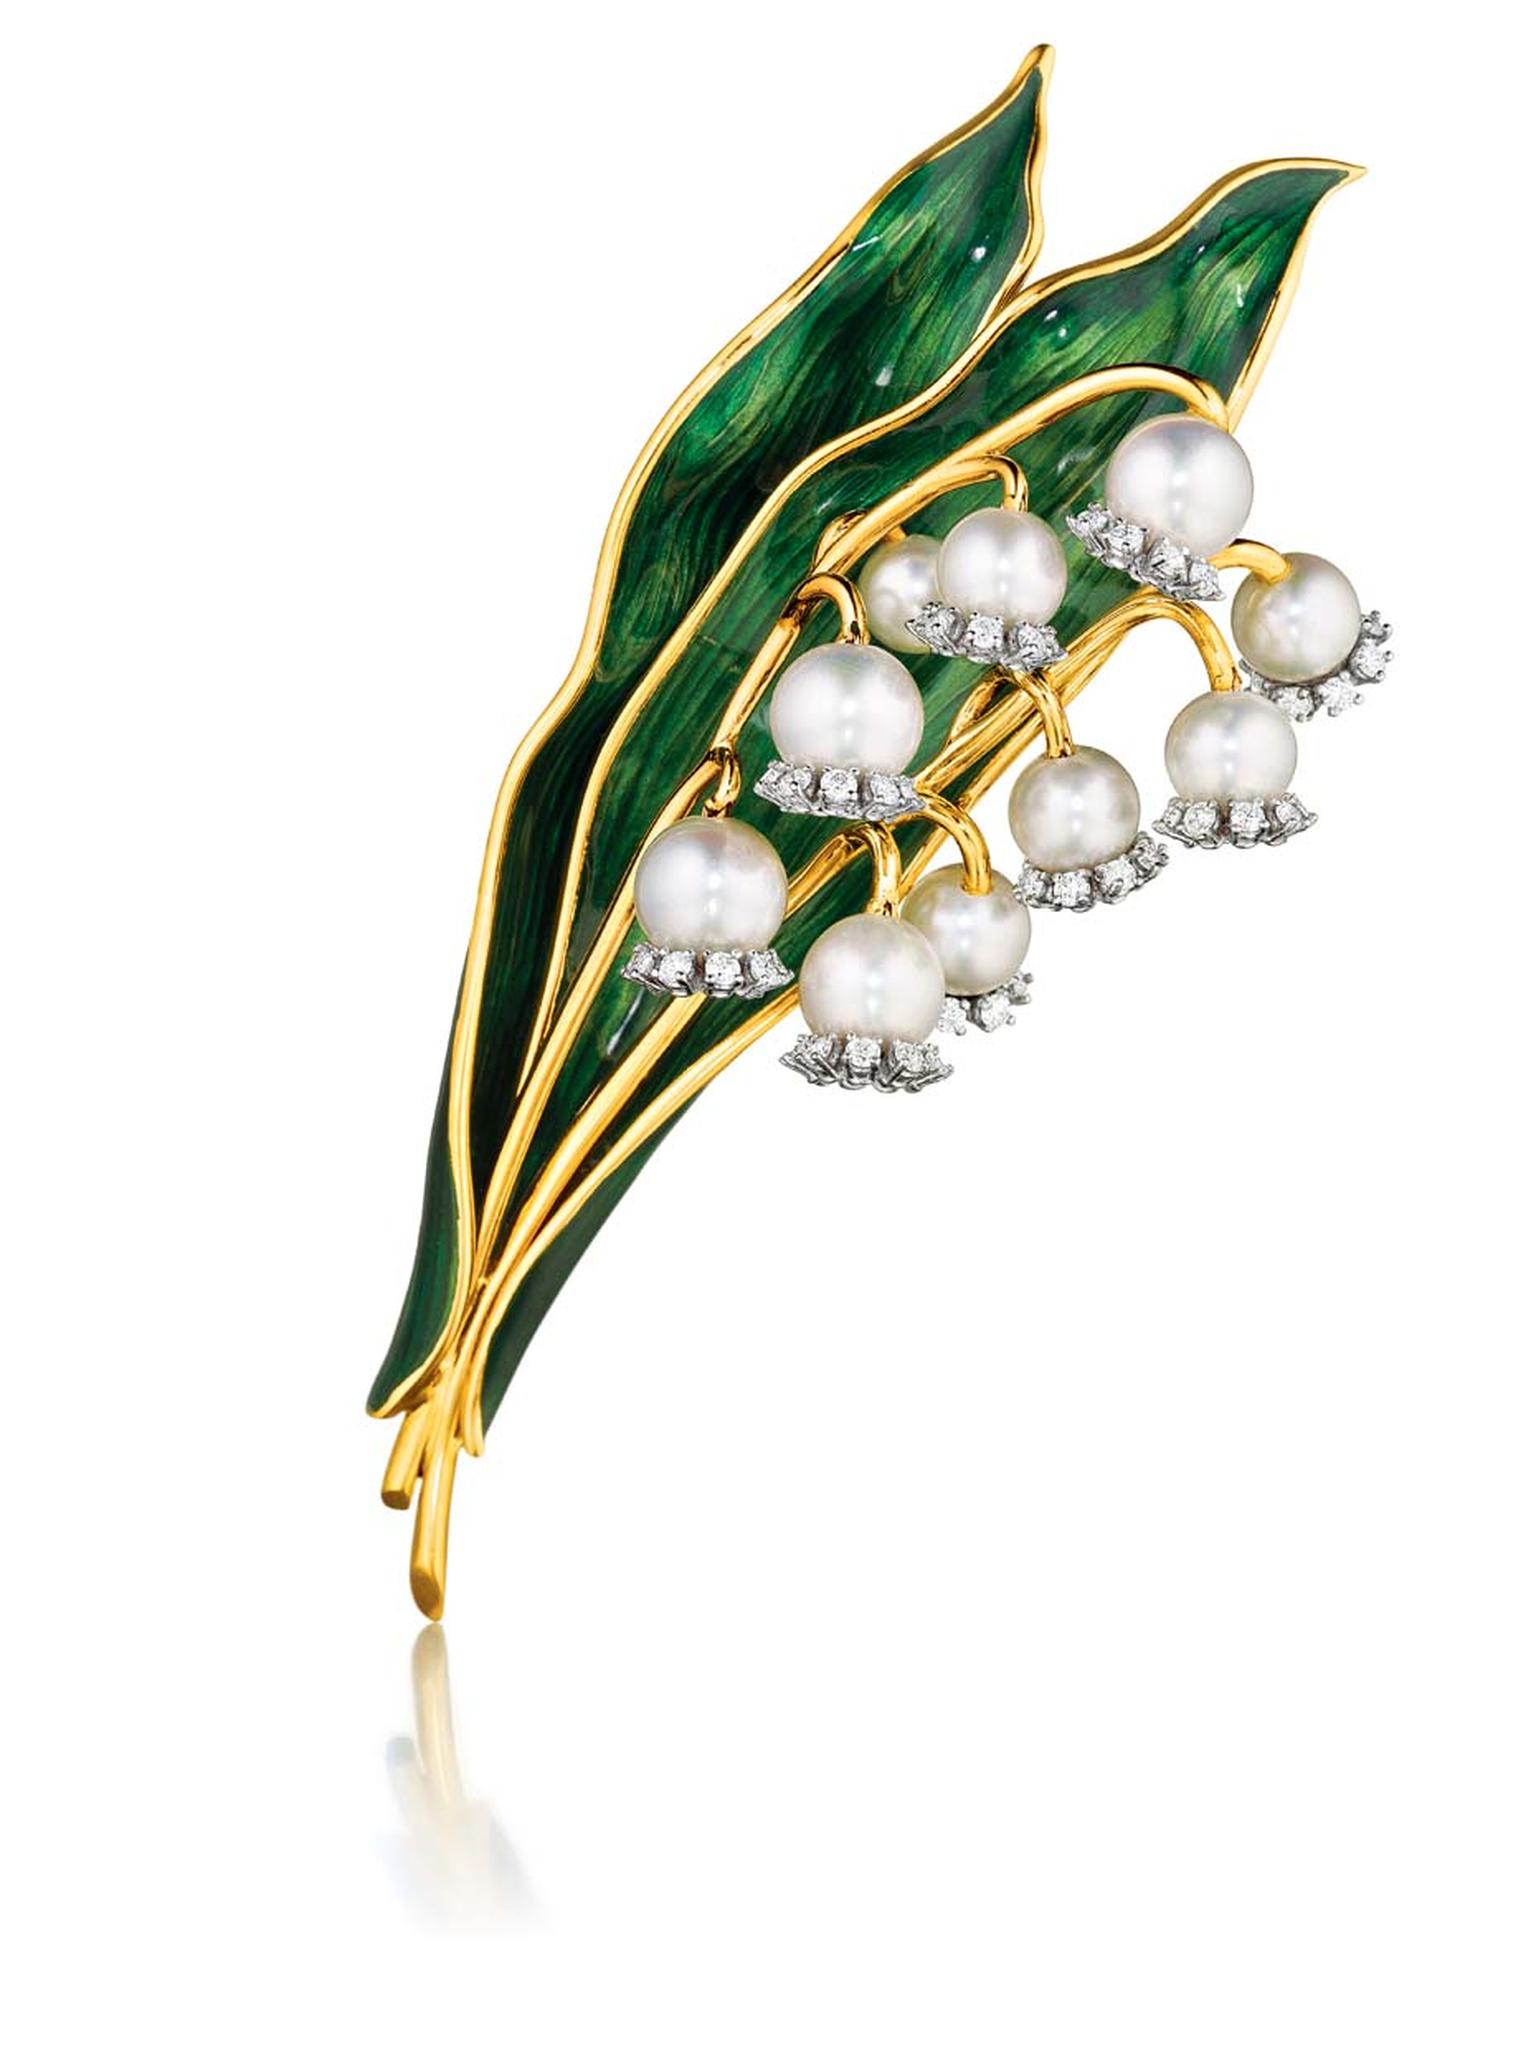 Verdura's 1956 Lily of the Valley brooch with pearls and diamonds © Verdura.